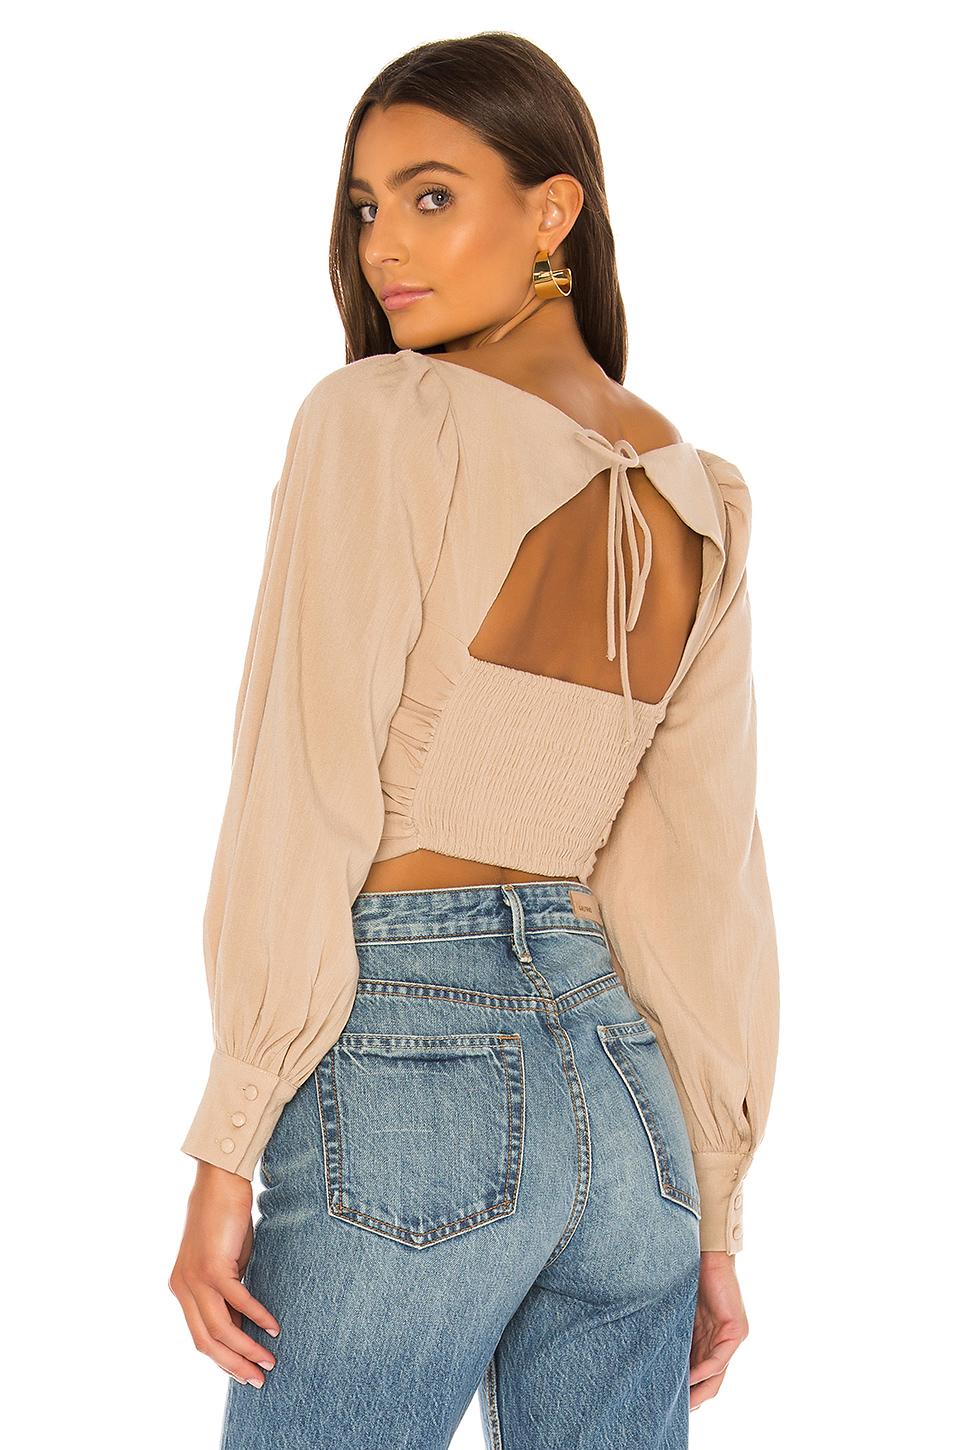 MAJORELLE Synthetic Emily Top, Plain Pattern in Beige (Natural) - Lyst